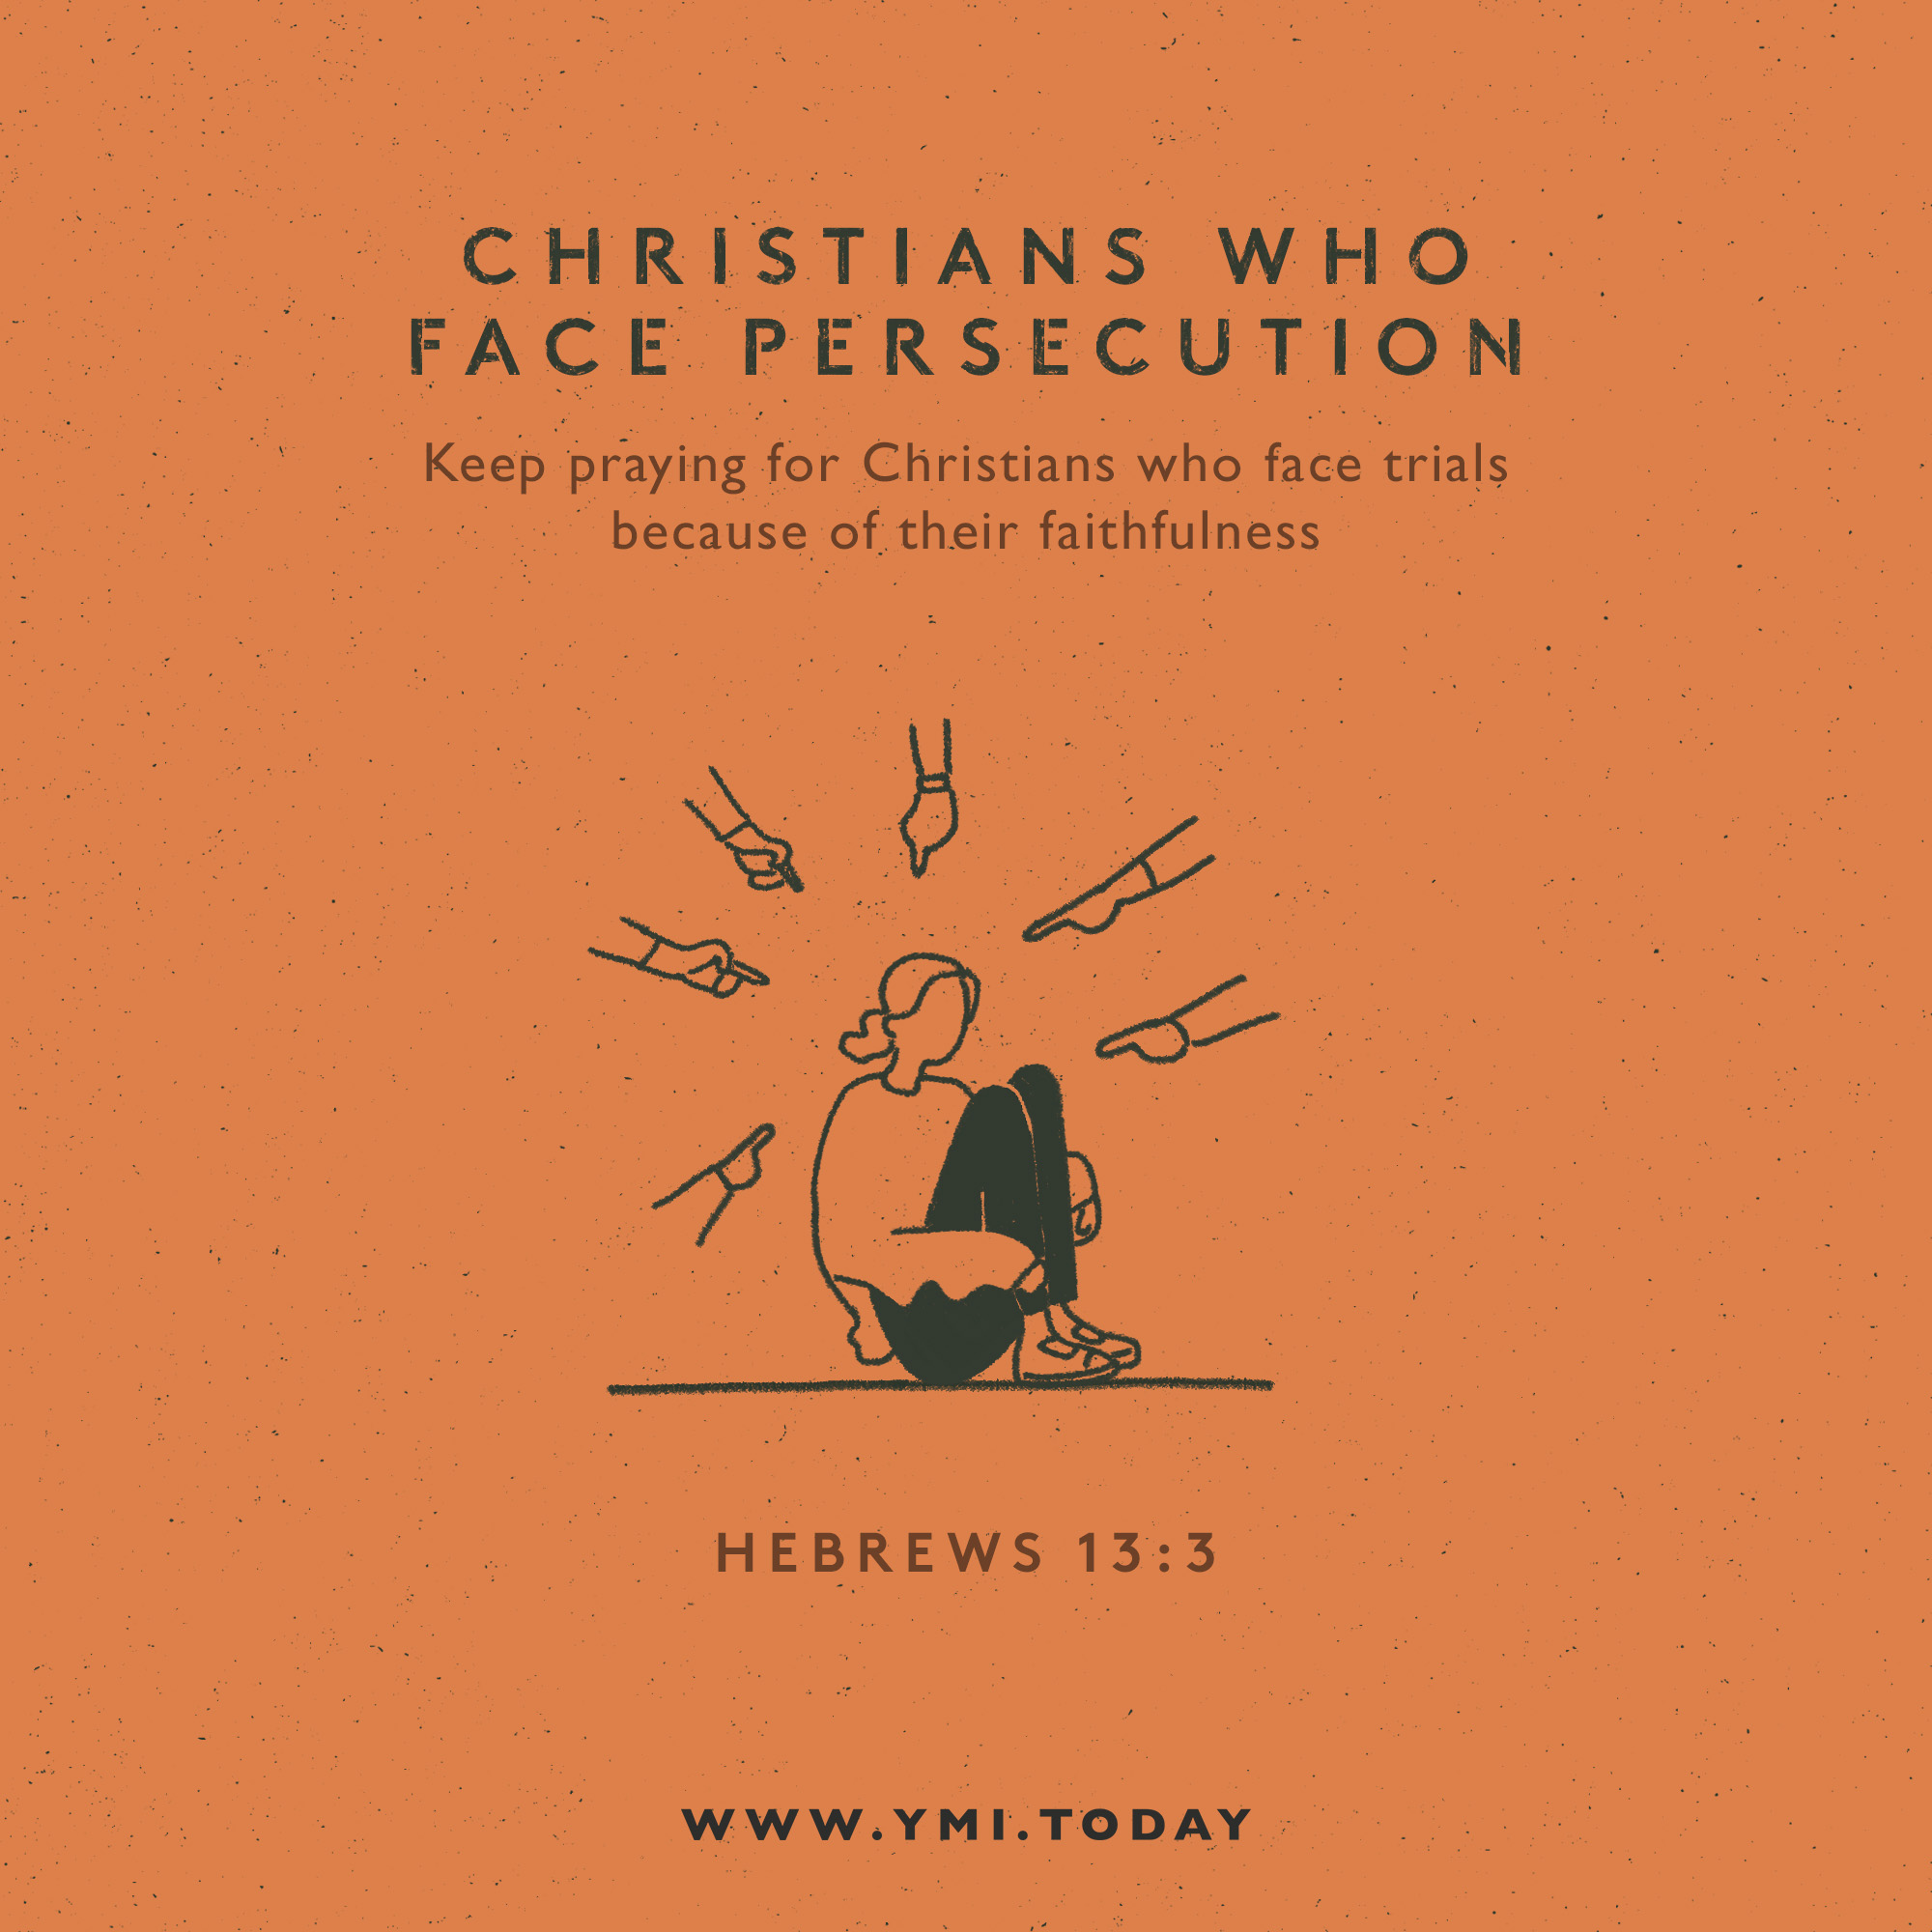 Christians who face persecution. Keep praying for Christians who face trials because of their faithfulness. Hebrews 13:3.